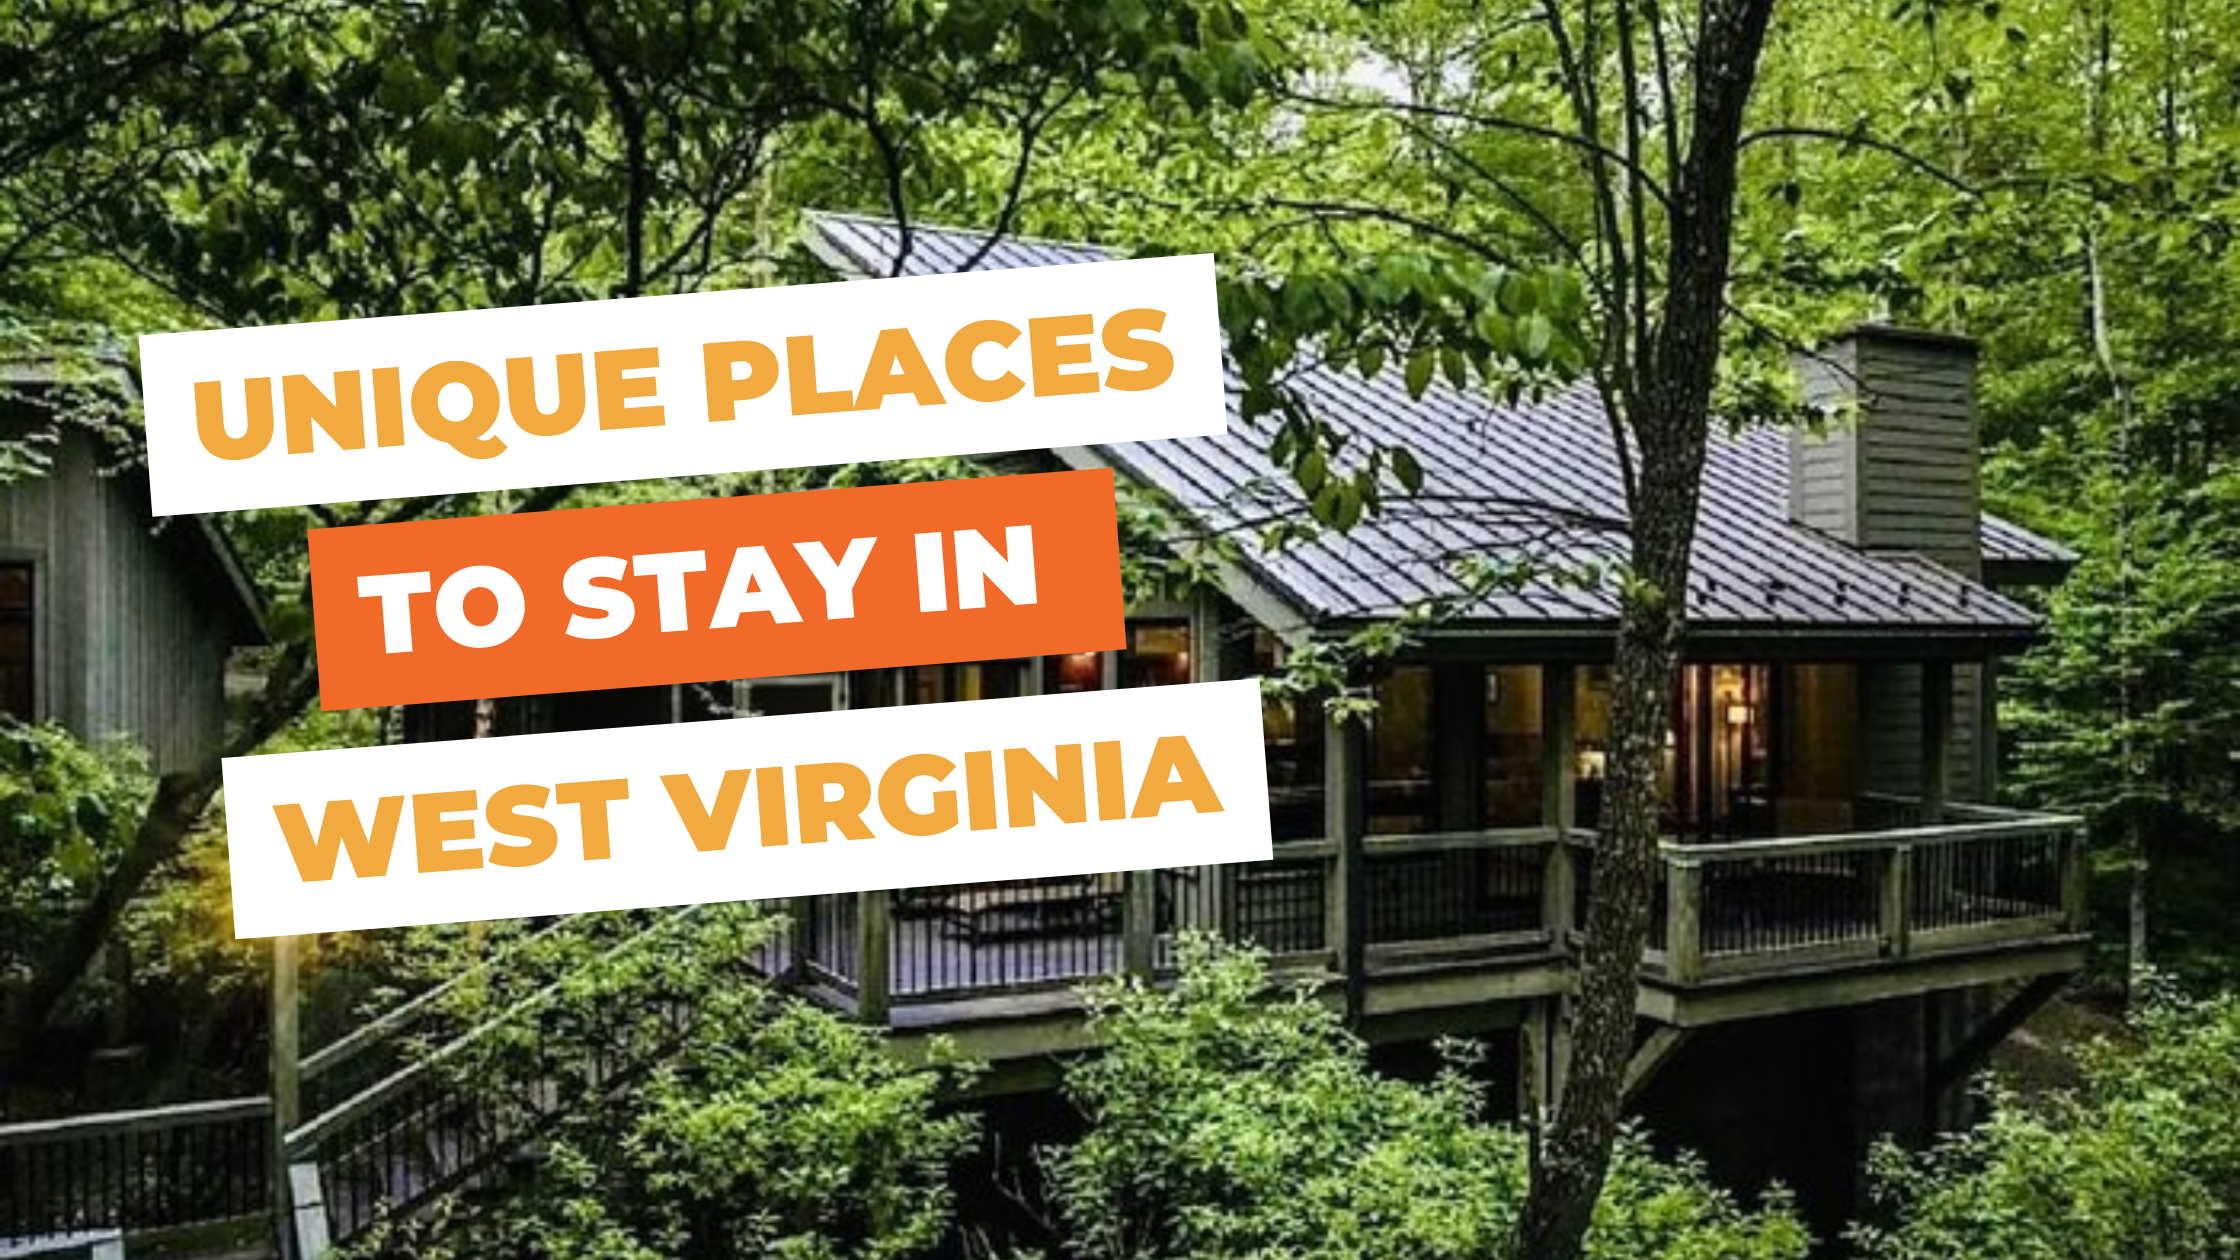 10 Unique Places You Had No Idea You Could Stay In West Virginia